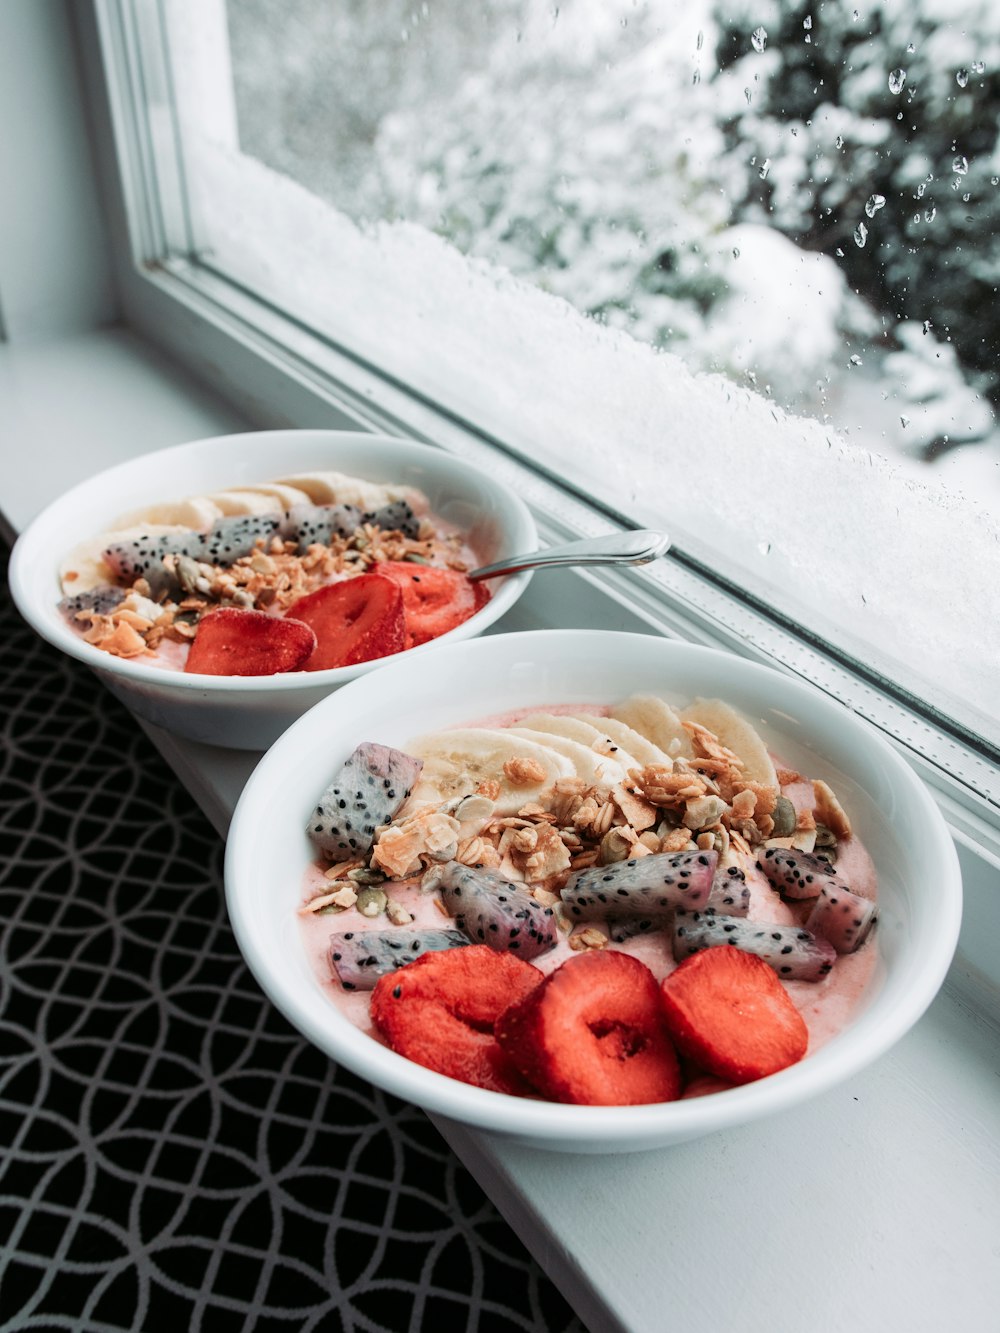 a couple of bowls of food on a window sill